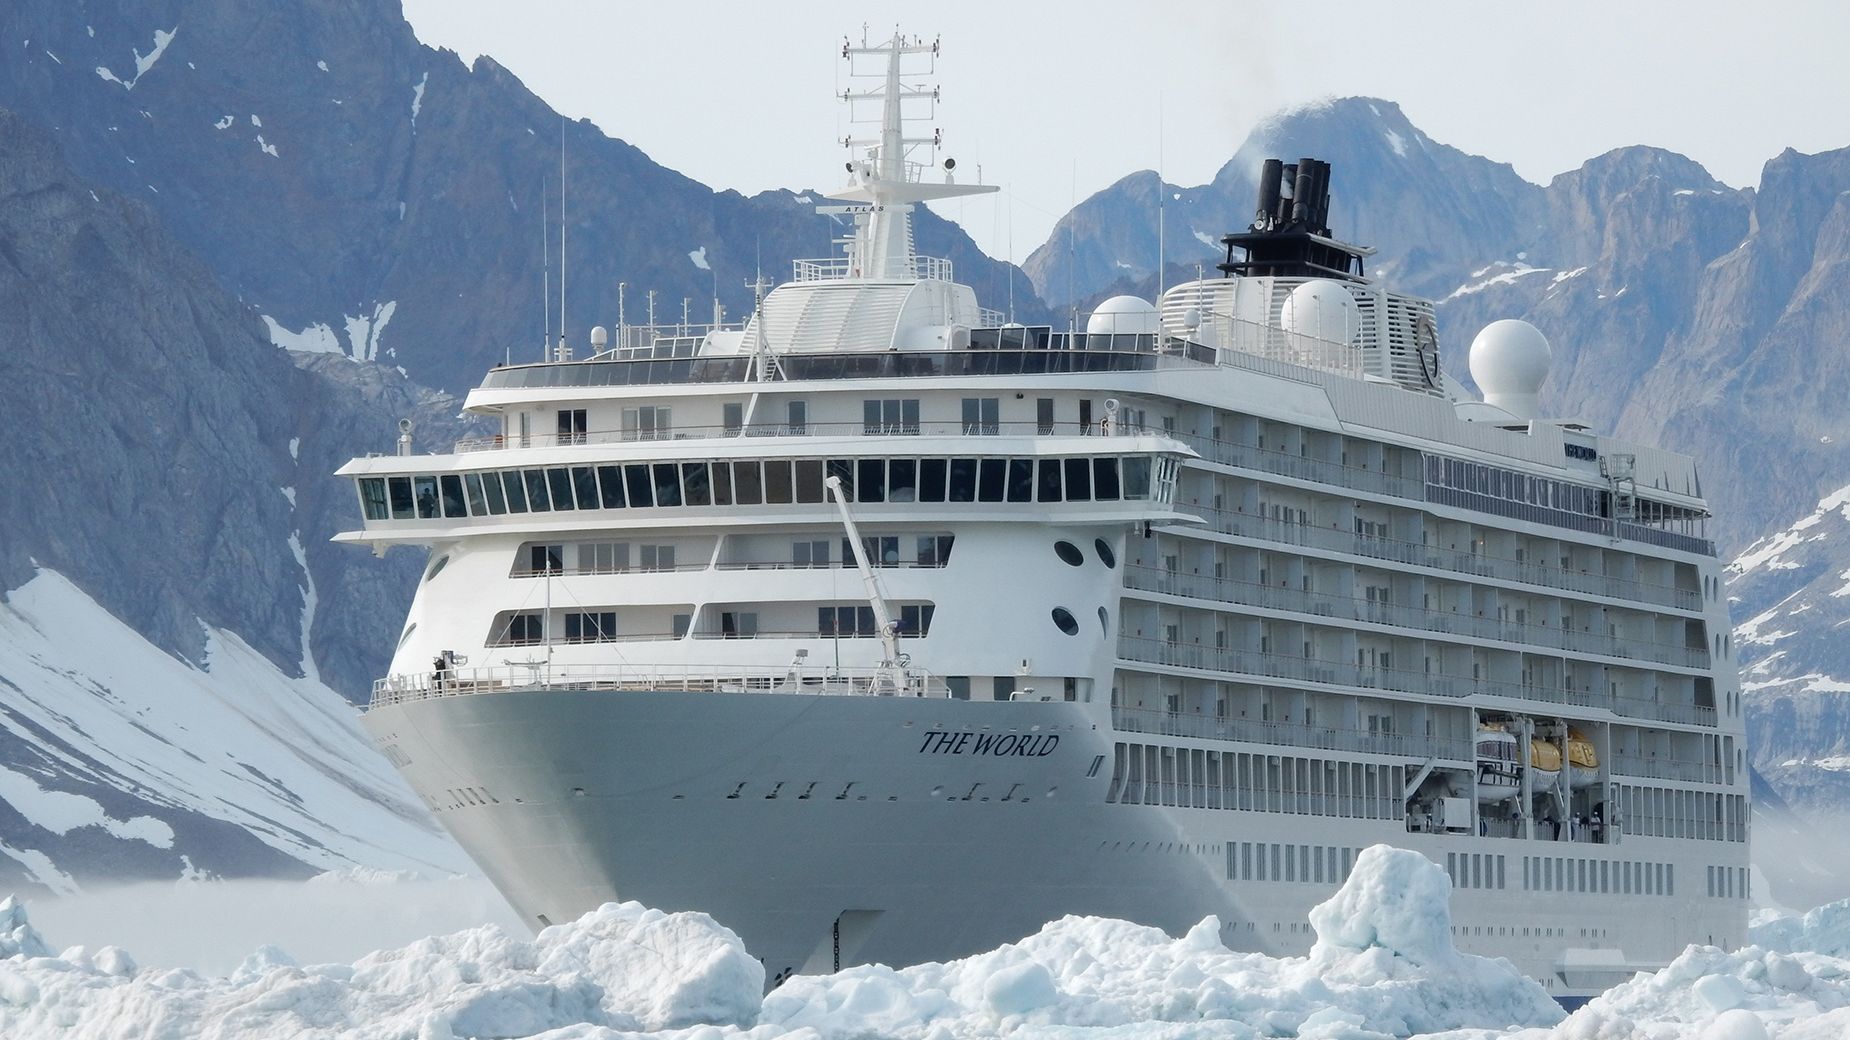 The World is an exclusive private residential ship that circumnavigates the world’s oceans.